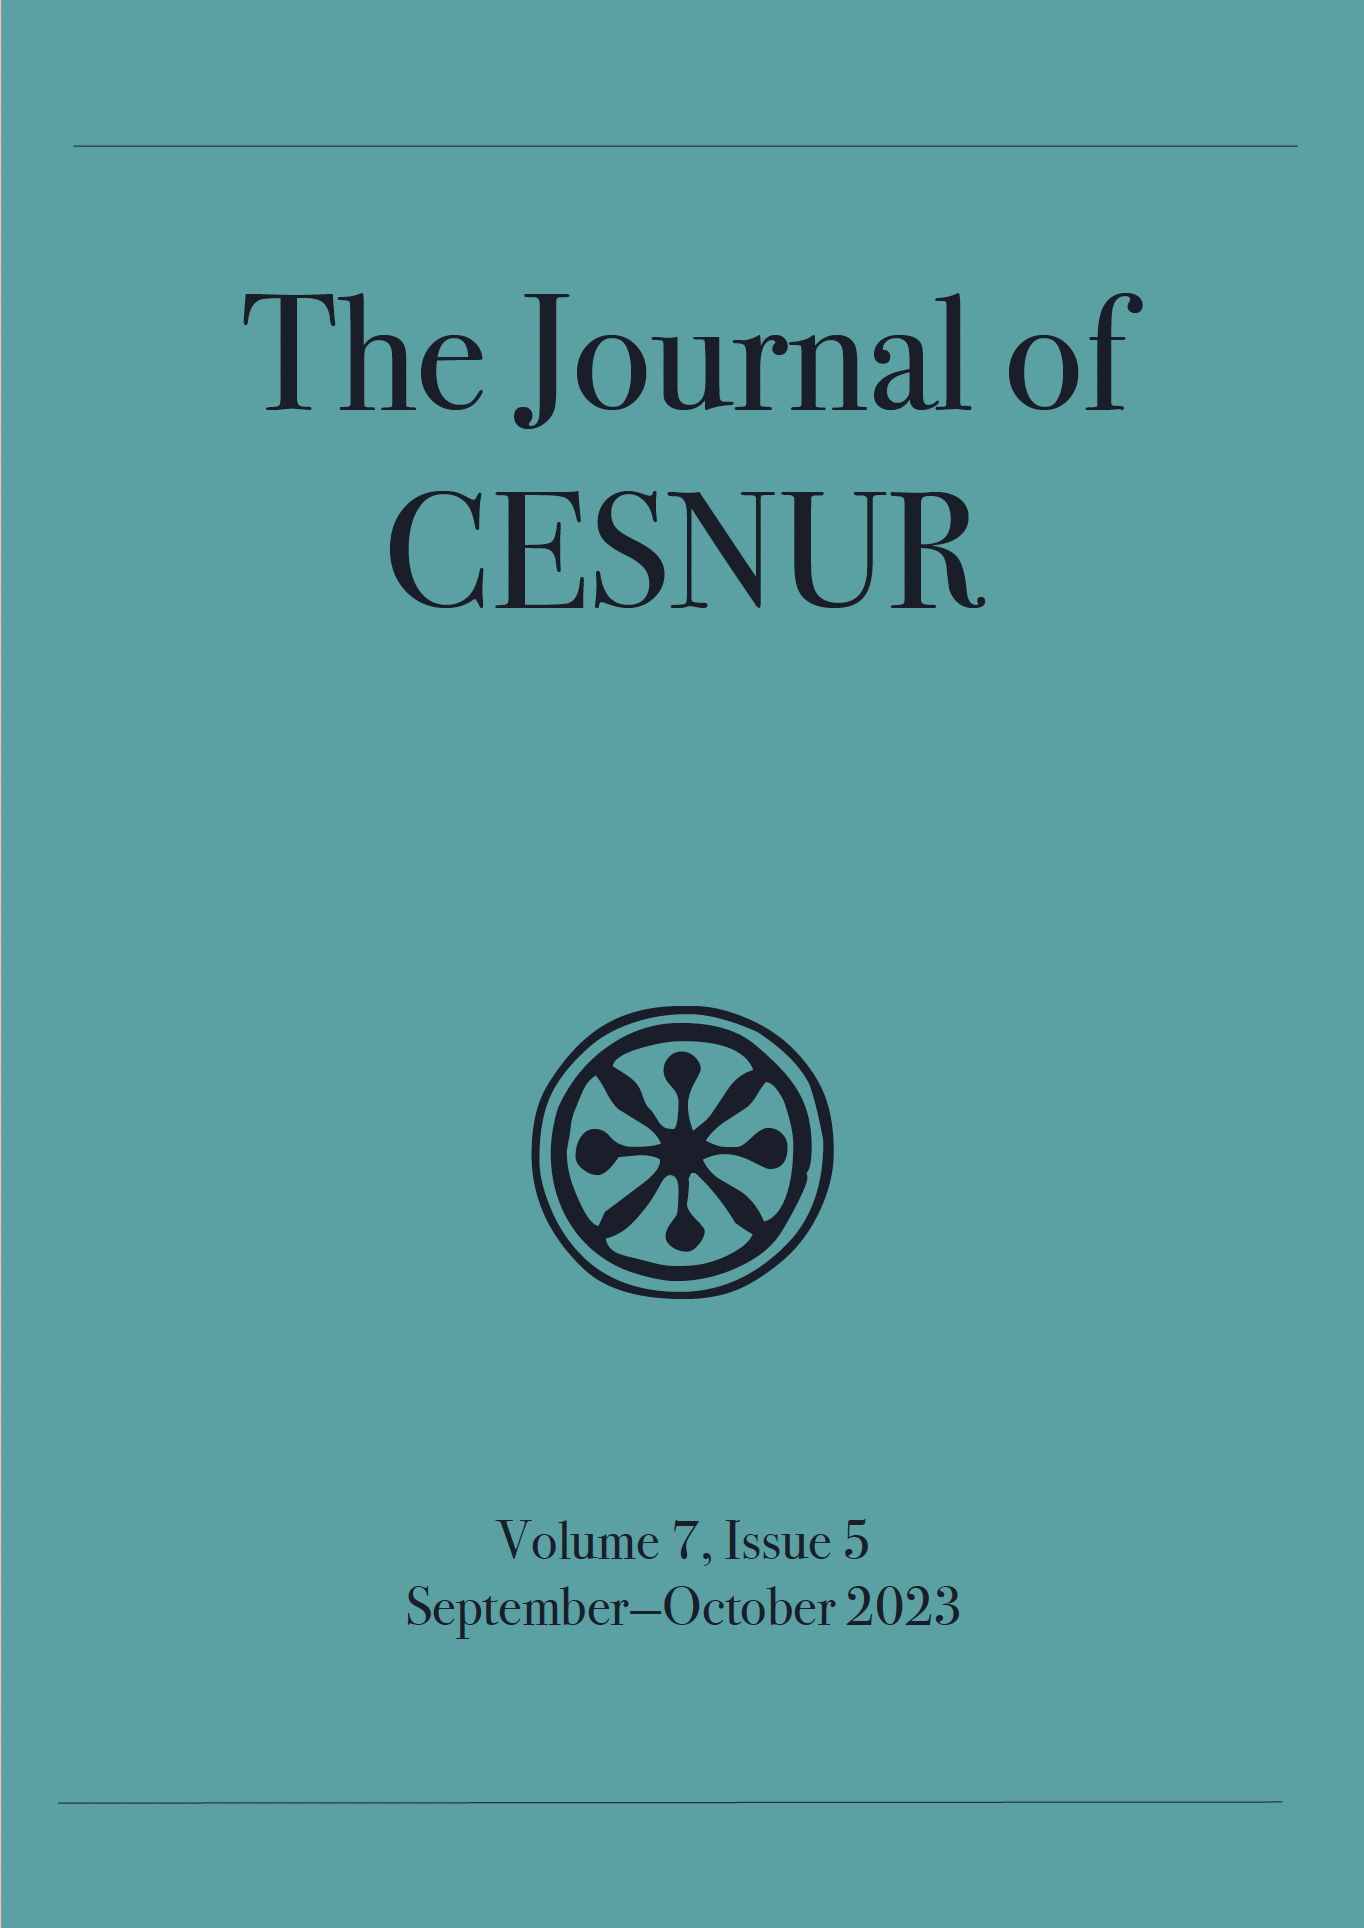 The Journal of Cesnur Volume 7 Issue 5 cover